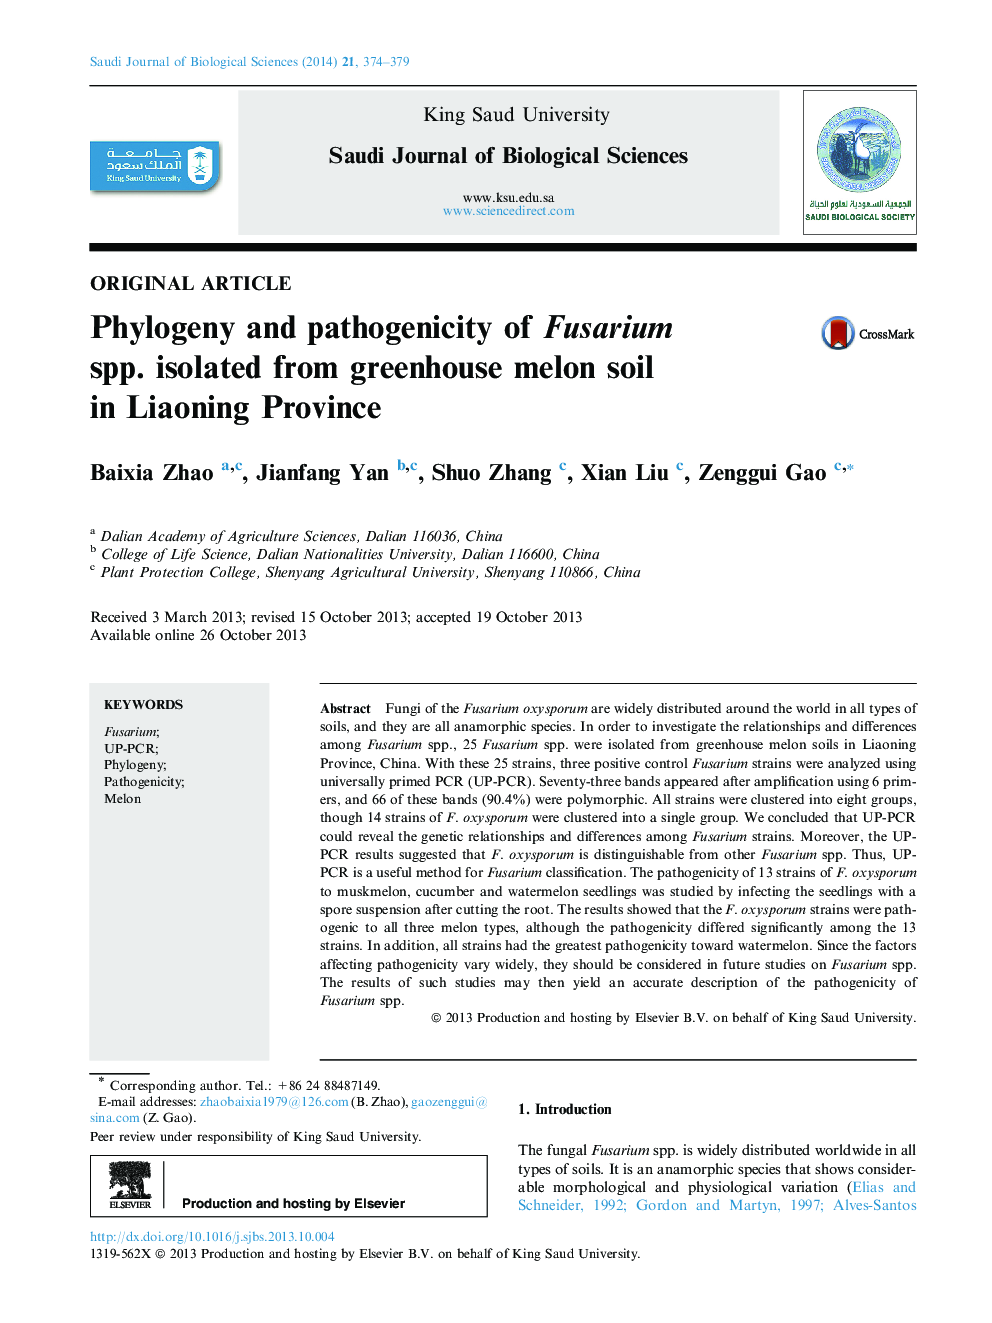 Phylogeny and pathogenicity of Fusarium spp. isolated from greenhouse melon soil in Liaoning Province 